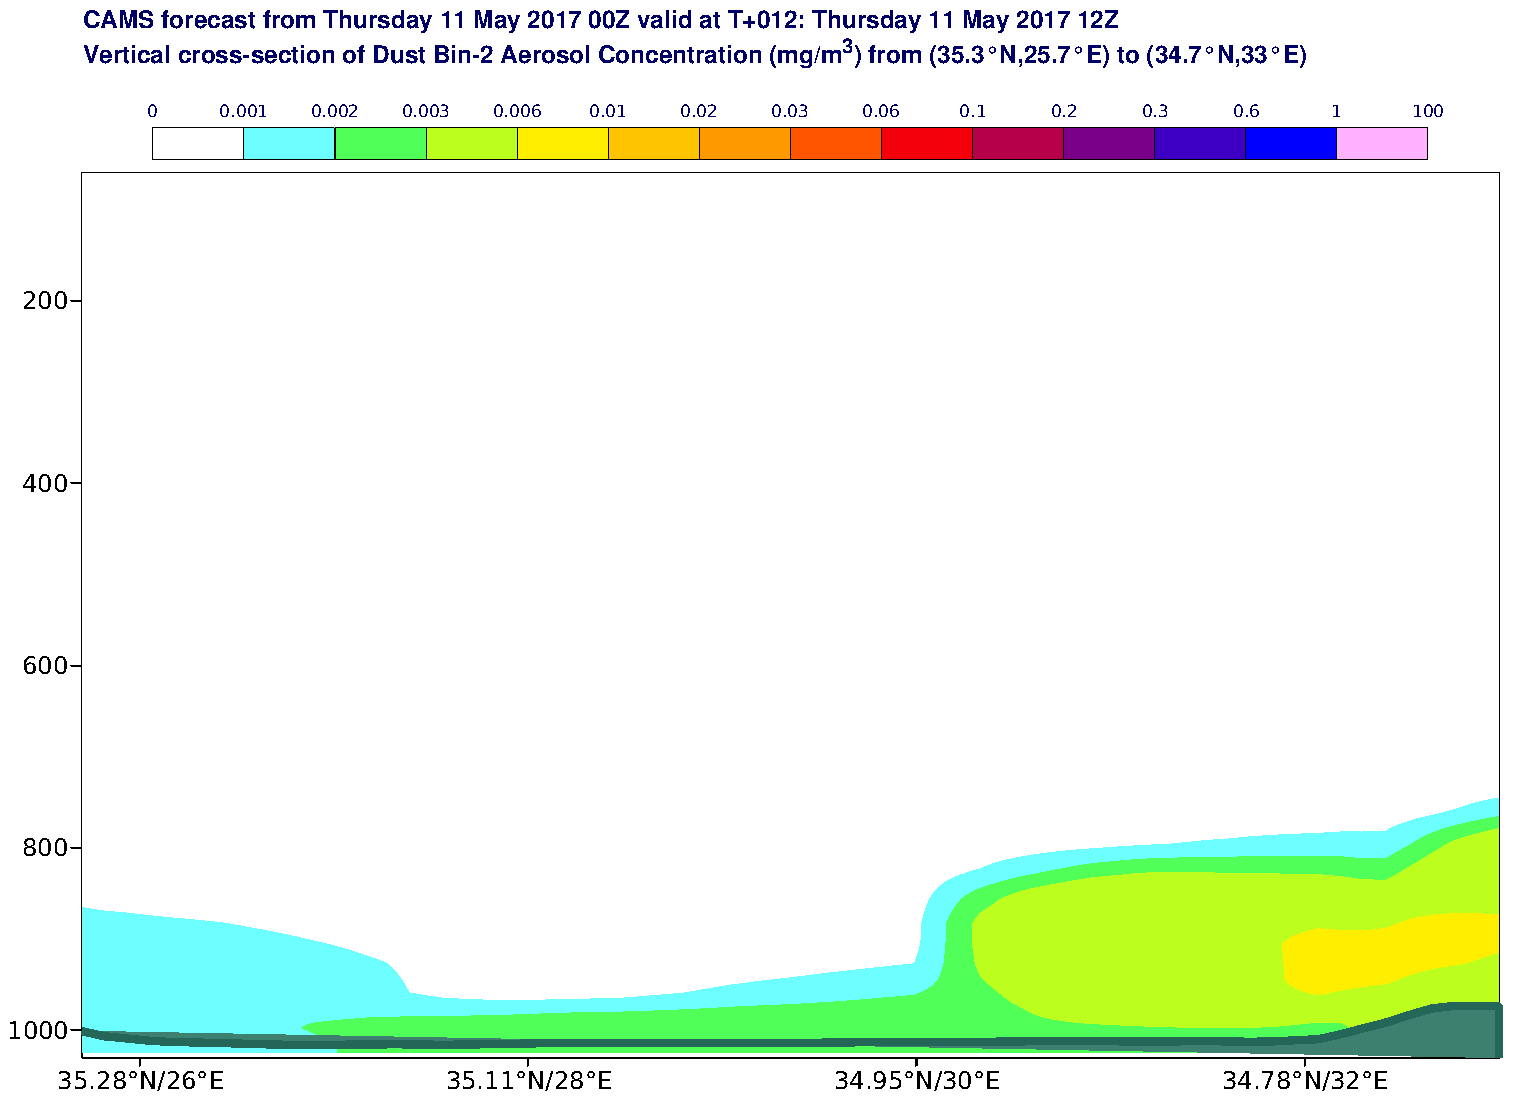 Vertical cross-section of Dust Bin-2 Aerosol Concentration (mg/m3) valid at T12 - 2017-05-11 12:00